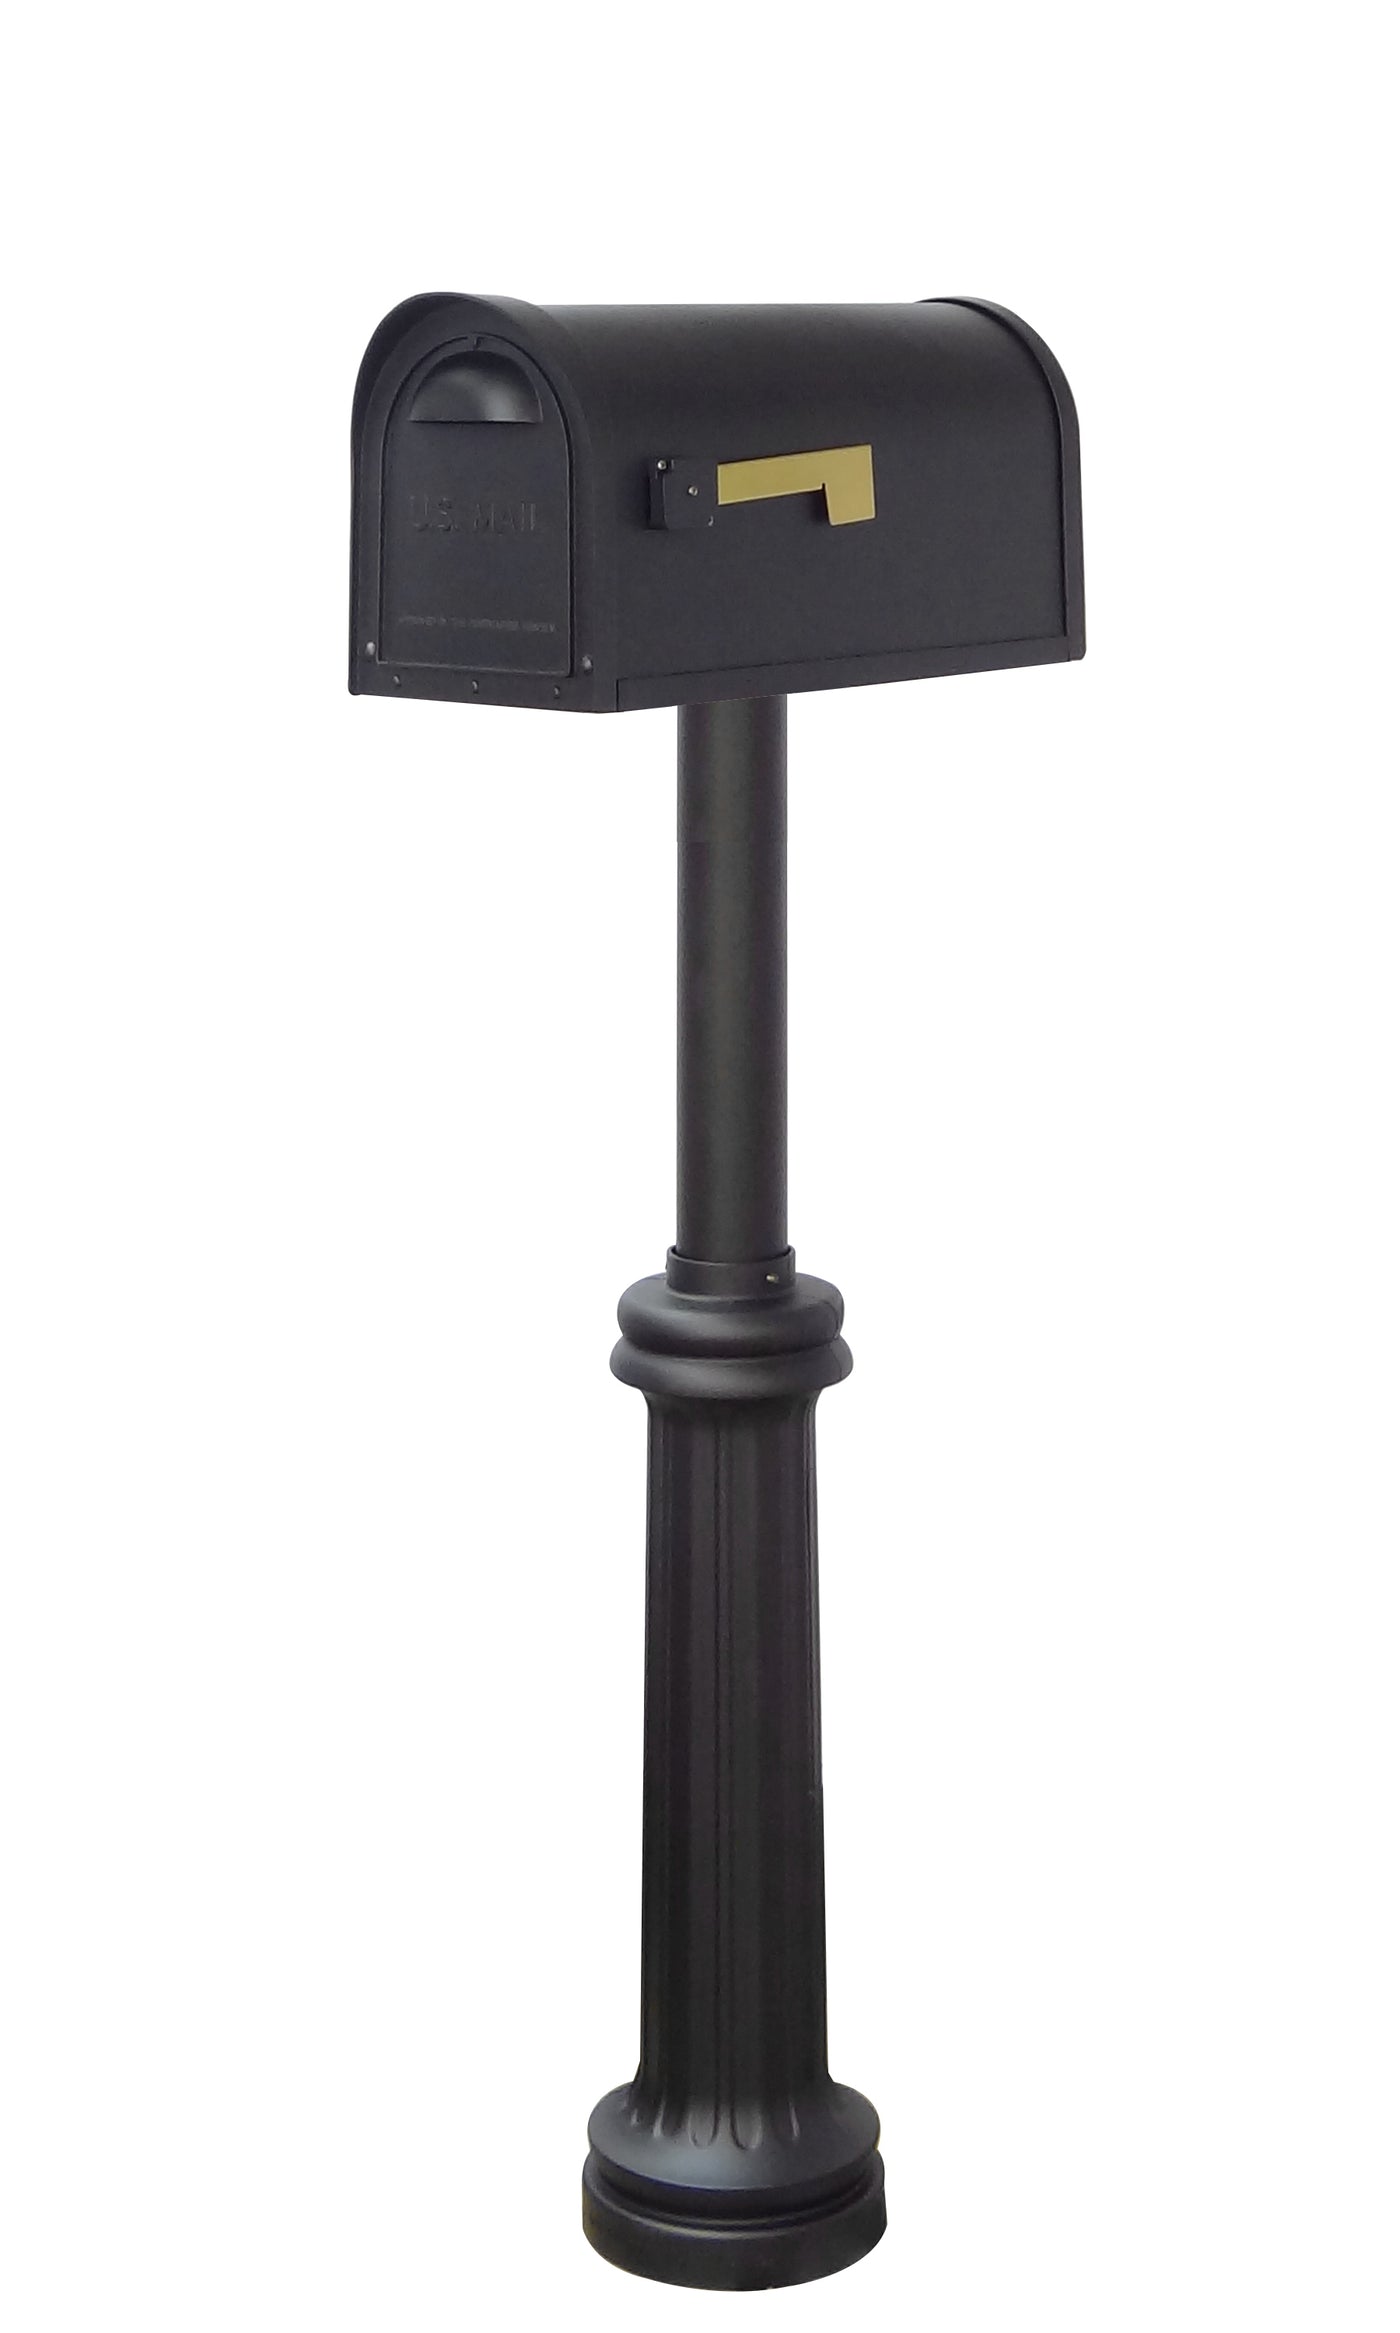 Classic Curbside Mailbox and Bradford Direct Burial Top Mount Mailbox Post Decorative Aluminum